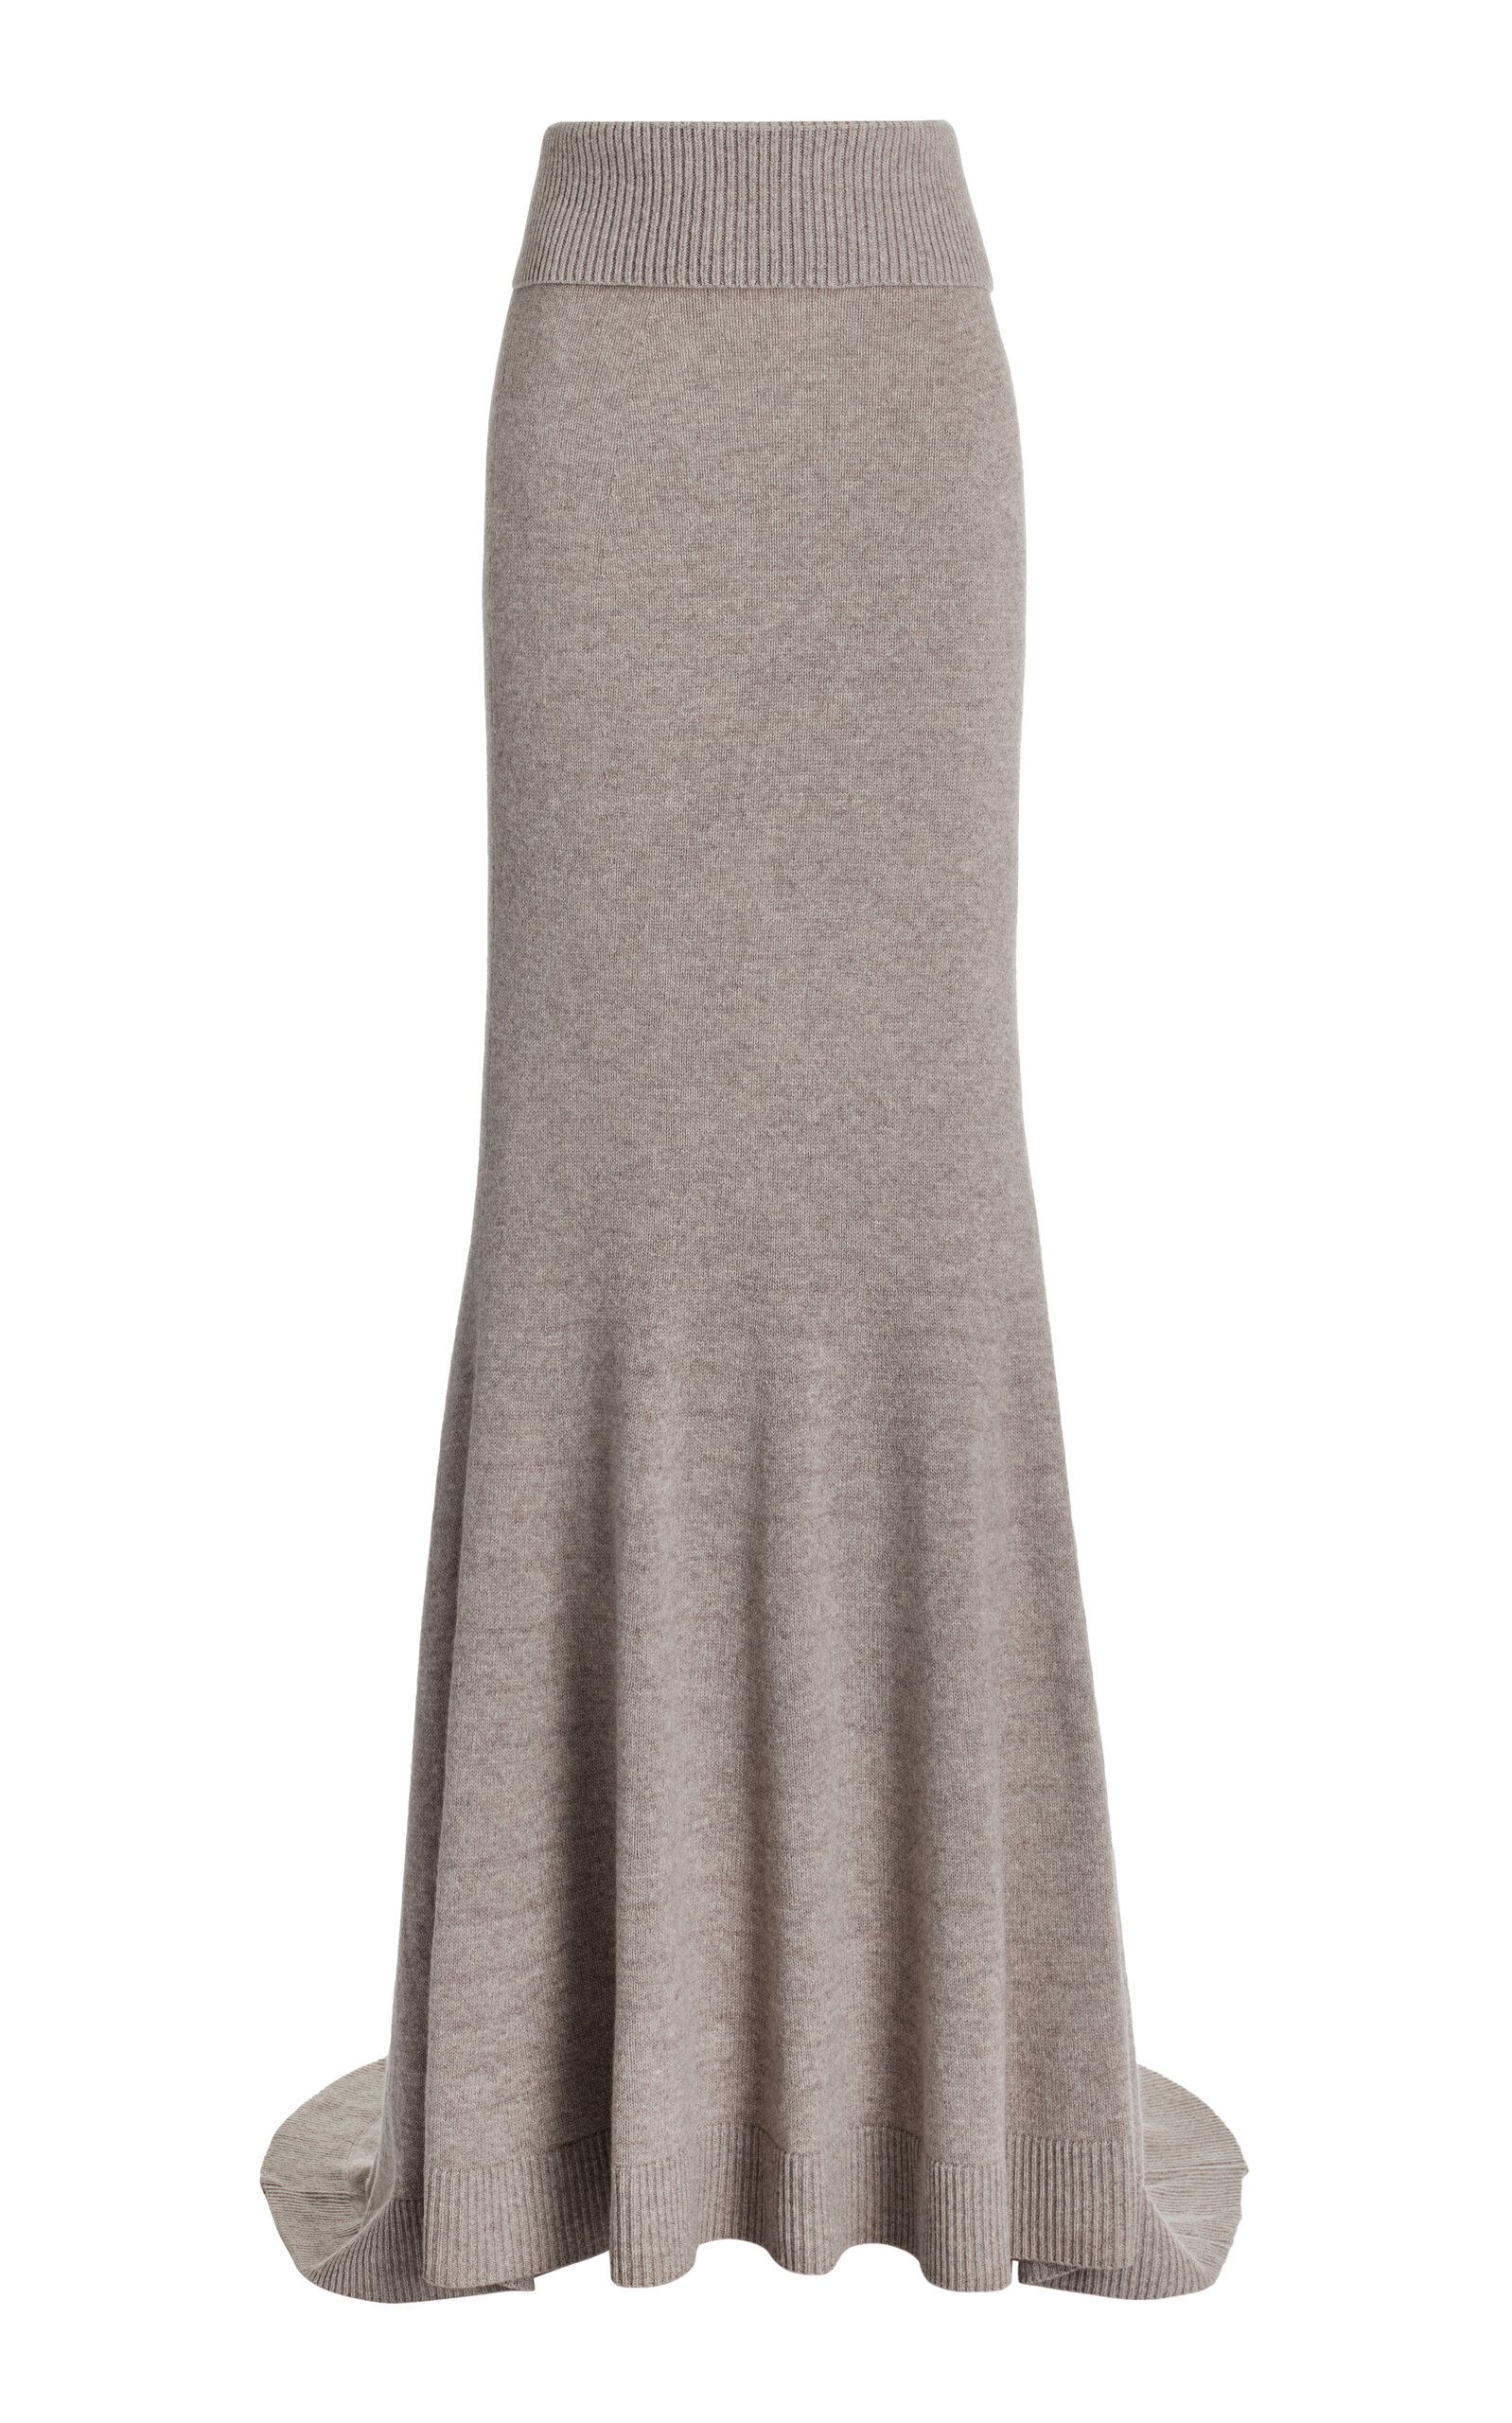 Michael Kors Women's Knit Cashmere Maxi Skirt In Taupe